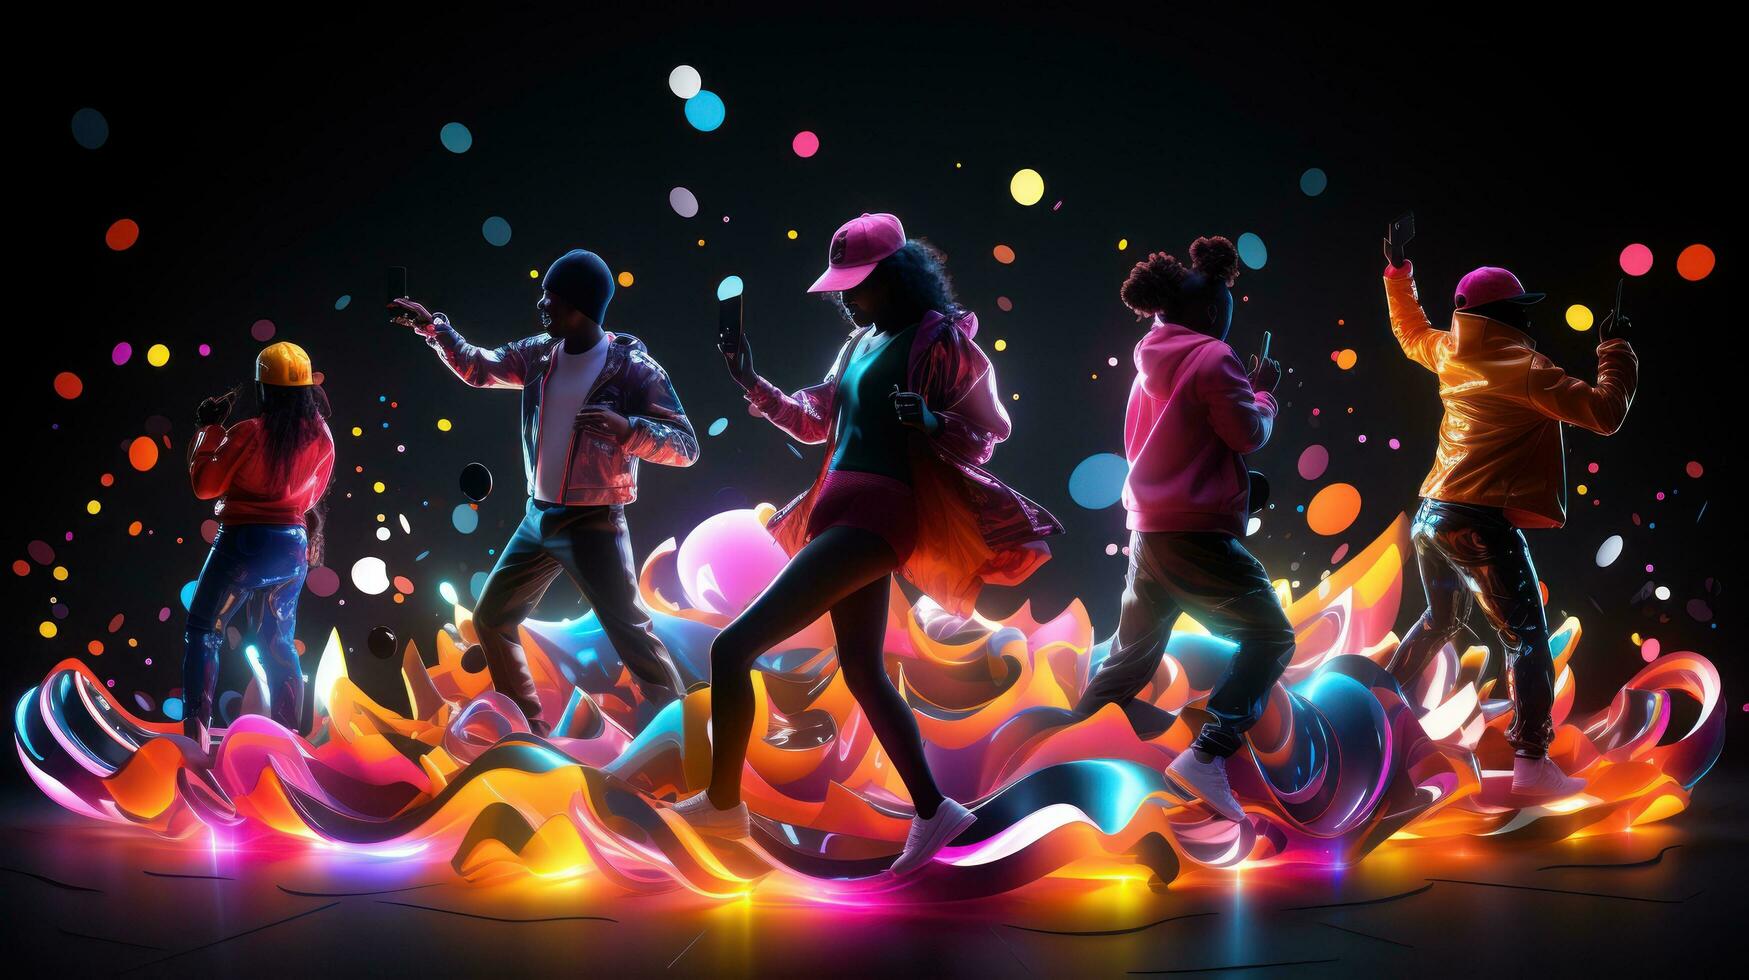 People dancing with glowing neon accessories photo